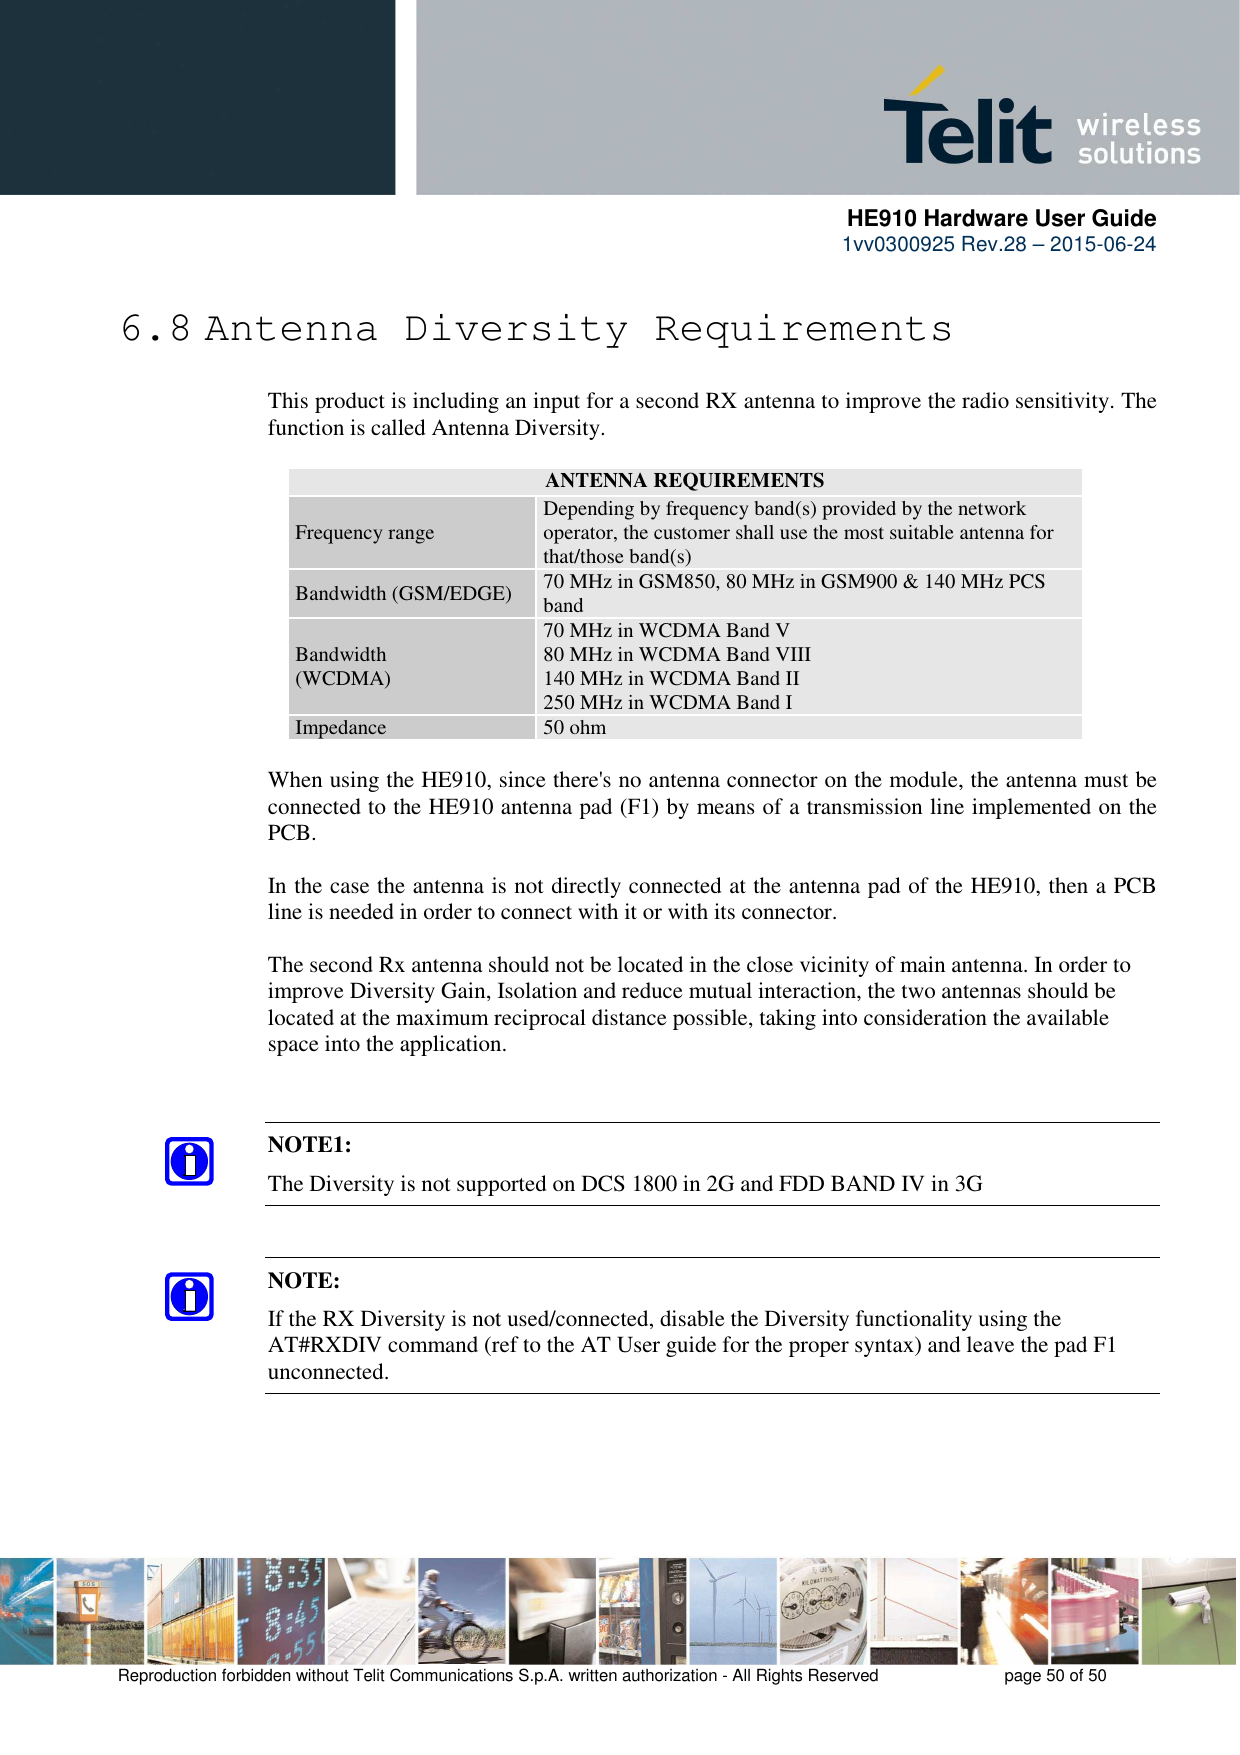      HE910 Hardware User Guide 1vv0300925 Rev.28 – 2015-06-24    Reproduction forbidden without Telit Communications S.p.A. written authorization - All Rights Reserved    page 50 of 50  6.8 Antenna Diversity Requirements This product is including an input for a second RX antenna to improve the radio sensitivity. The function is called Antenna Diversity.  ANTENNA REQUIREMENTS Frequency range  Depending by frequency band(s) provided by the network operator, the customer shall use the most suitable antenna for that/those band(s) Bandwidth (GSM/EDGE)  70 MHz in GSM850, 80 MHz in GSM900 &amp; 140 MHz PCS band Bandwidth  (WCDMA) 70 MHz in WCDMA Band V 80 MHz in WCDMA Band VIII 140 MHz in WCDMA Band II 250 MHz in WCDMA Band I Impedance  50 ohm  When using the HE910, since there&apos;s no antenna connector on the module, the antenna must be connected to the HE910 antenna pad (F1) by means of a transmission line implemented on the PCB.  In the case the antenna is not directly connected at the antenna pad of the HE910, then a PCB line is needed in order to connect with it or with its connector.   The second Rx antenna should not be located in the close vicinity of main antenna. In order to improve Diversity Gain, Isolation and reduce mutual interaction, the two antennas should be located at the maximum reciprocal distance possible, taking into consideration the available space into the application.    NOTE1: The Diversity is not supported on DCS 1800 in 2G and FDD BAND IV in 3G  NOTE: If the RX Diversity is not used/connected, disable the Diversity functionality using the AT#RXDIV command (ref to the AT User guide for the proper syntax) and leave the pad F1 unconnected.     